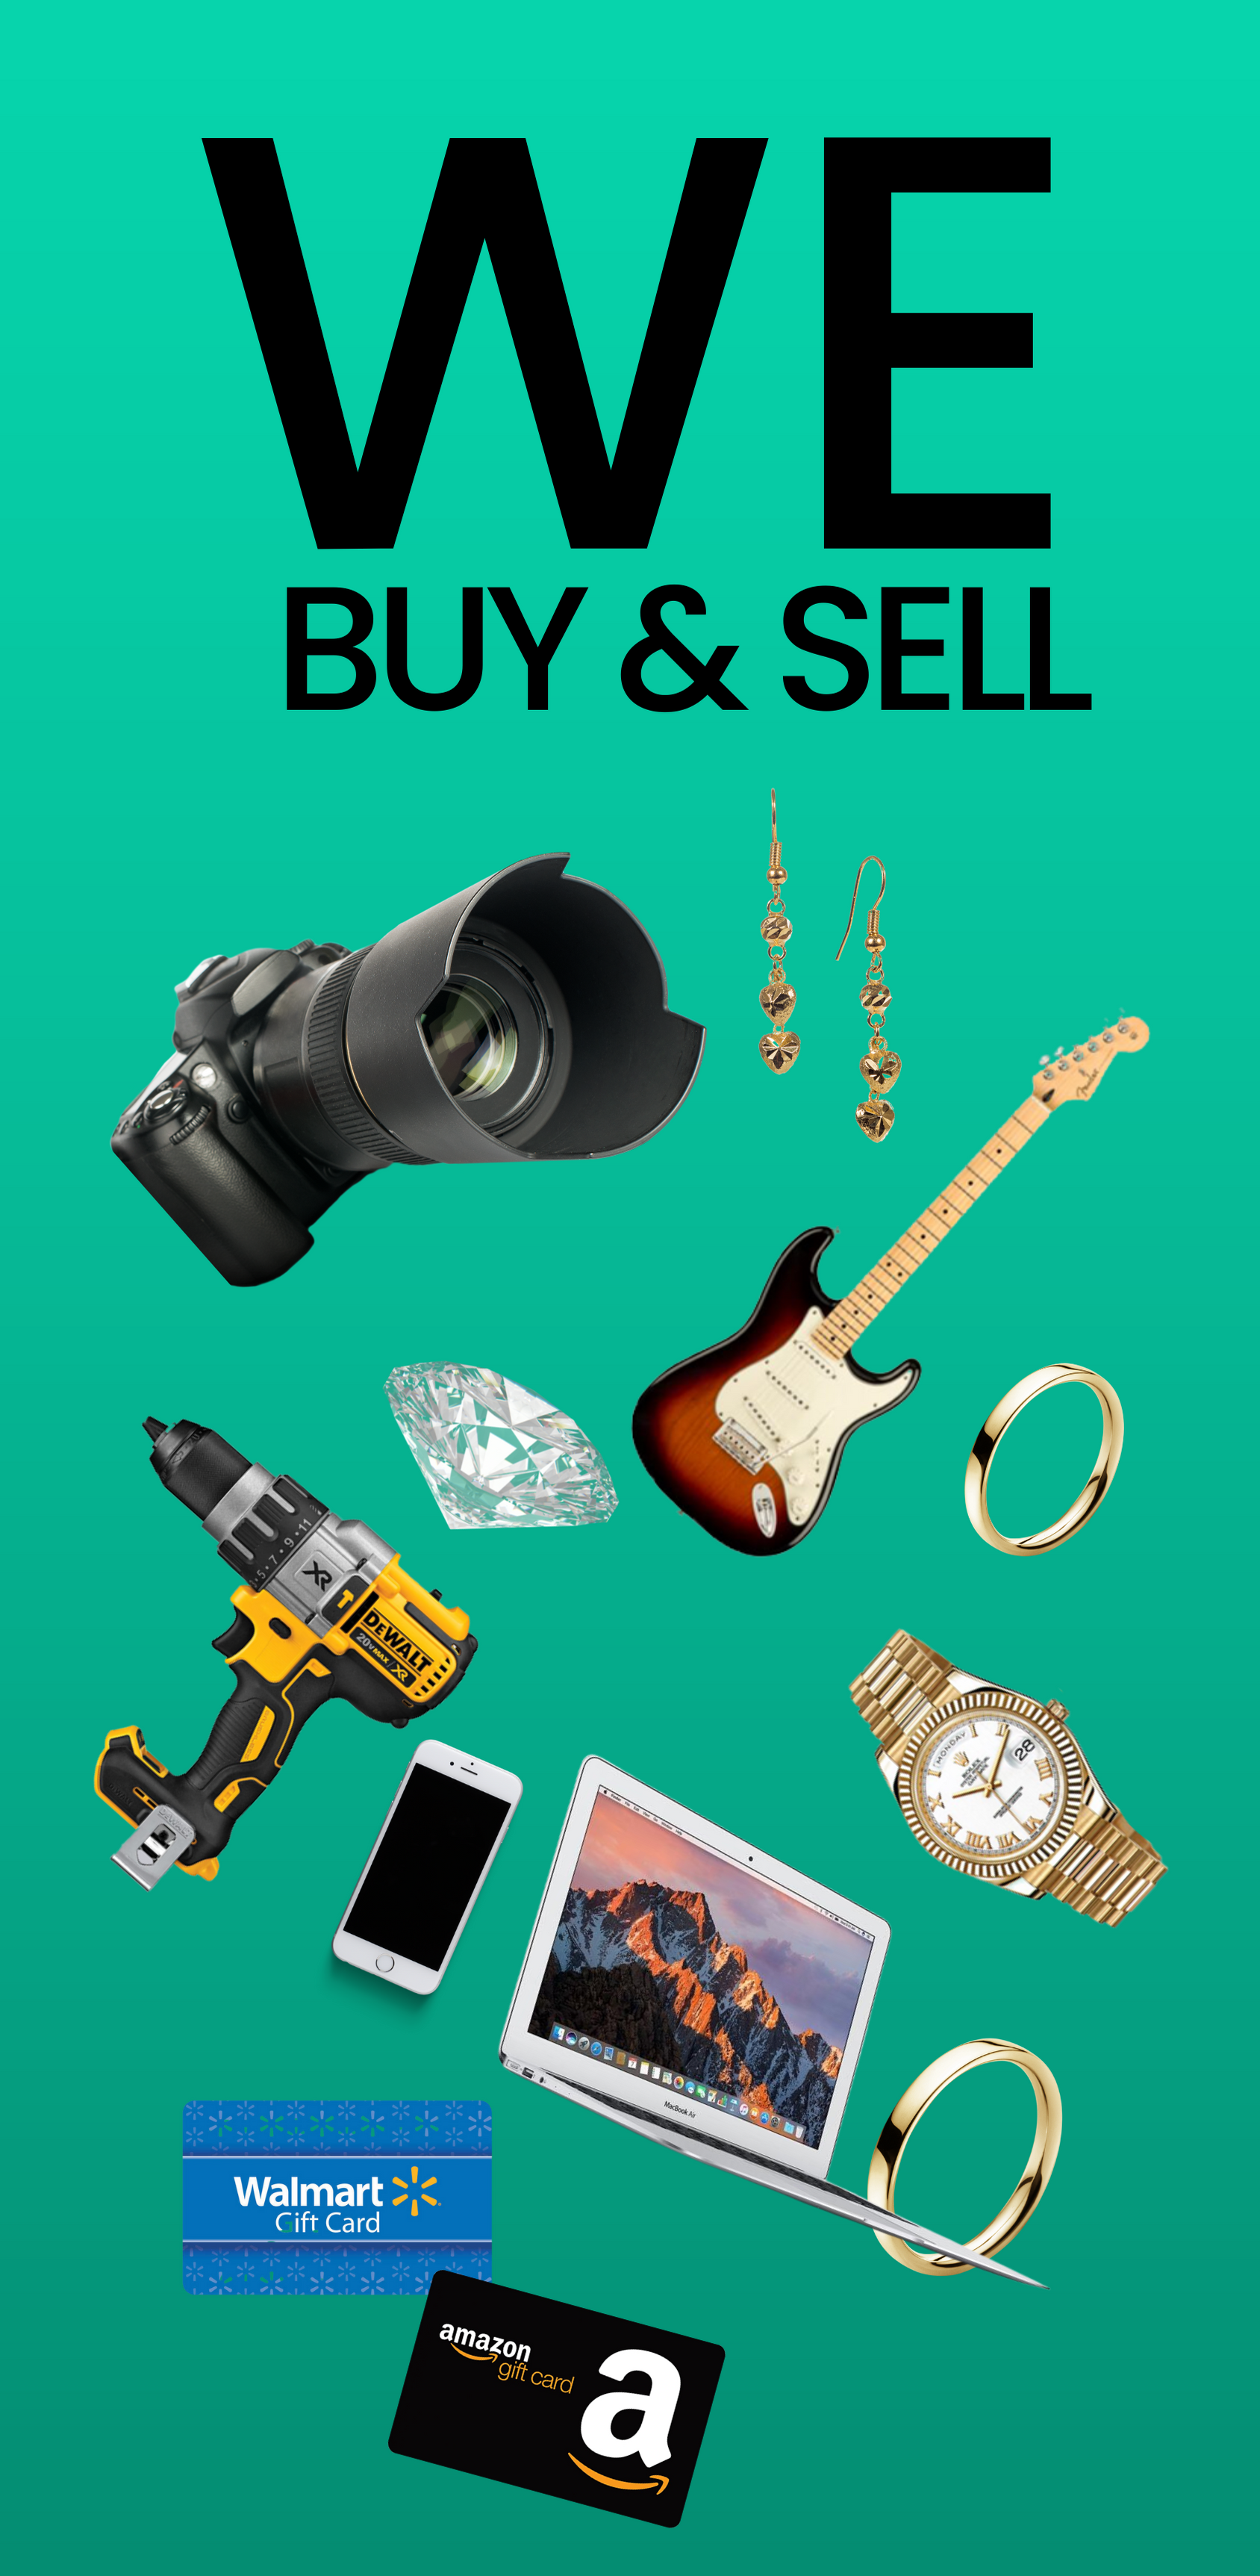 Pawn Shops Vs. Craigslist: 3 Reasons a Pawn Shop is a Better